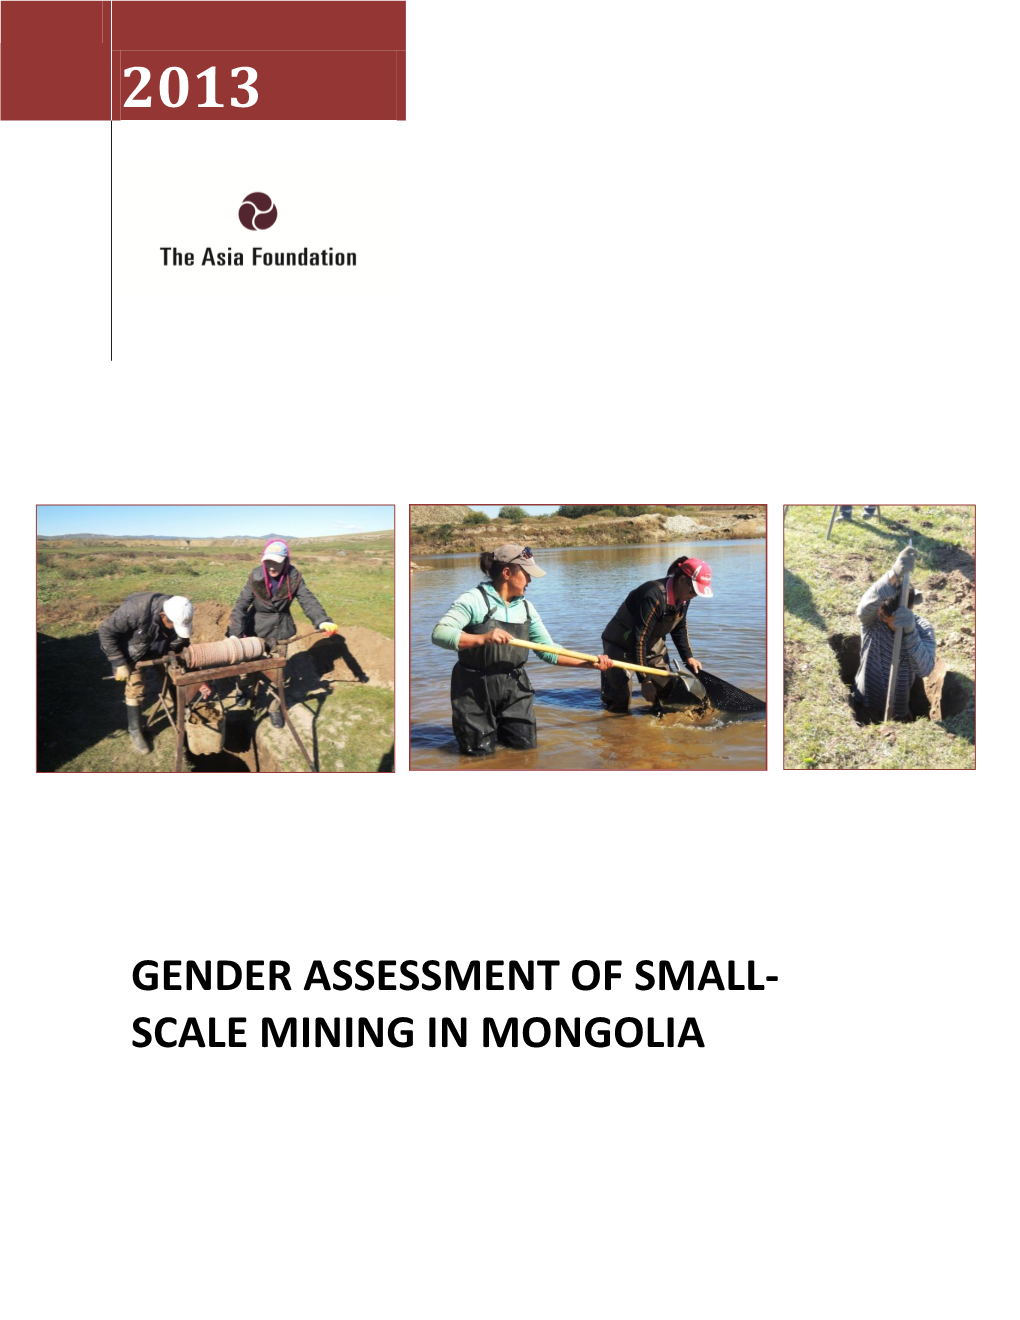 Gender Assessment of Small-Scale Mining in Mongolia